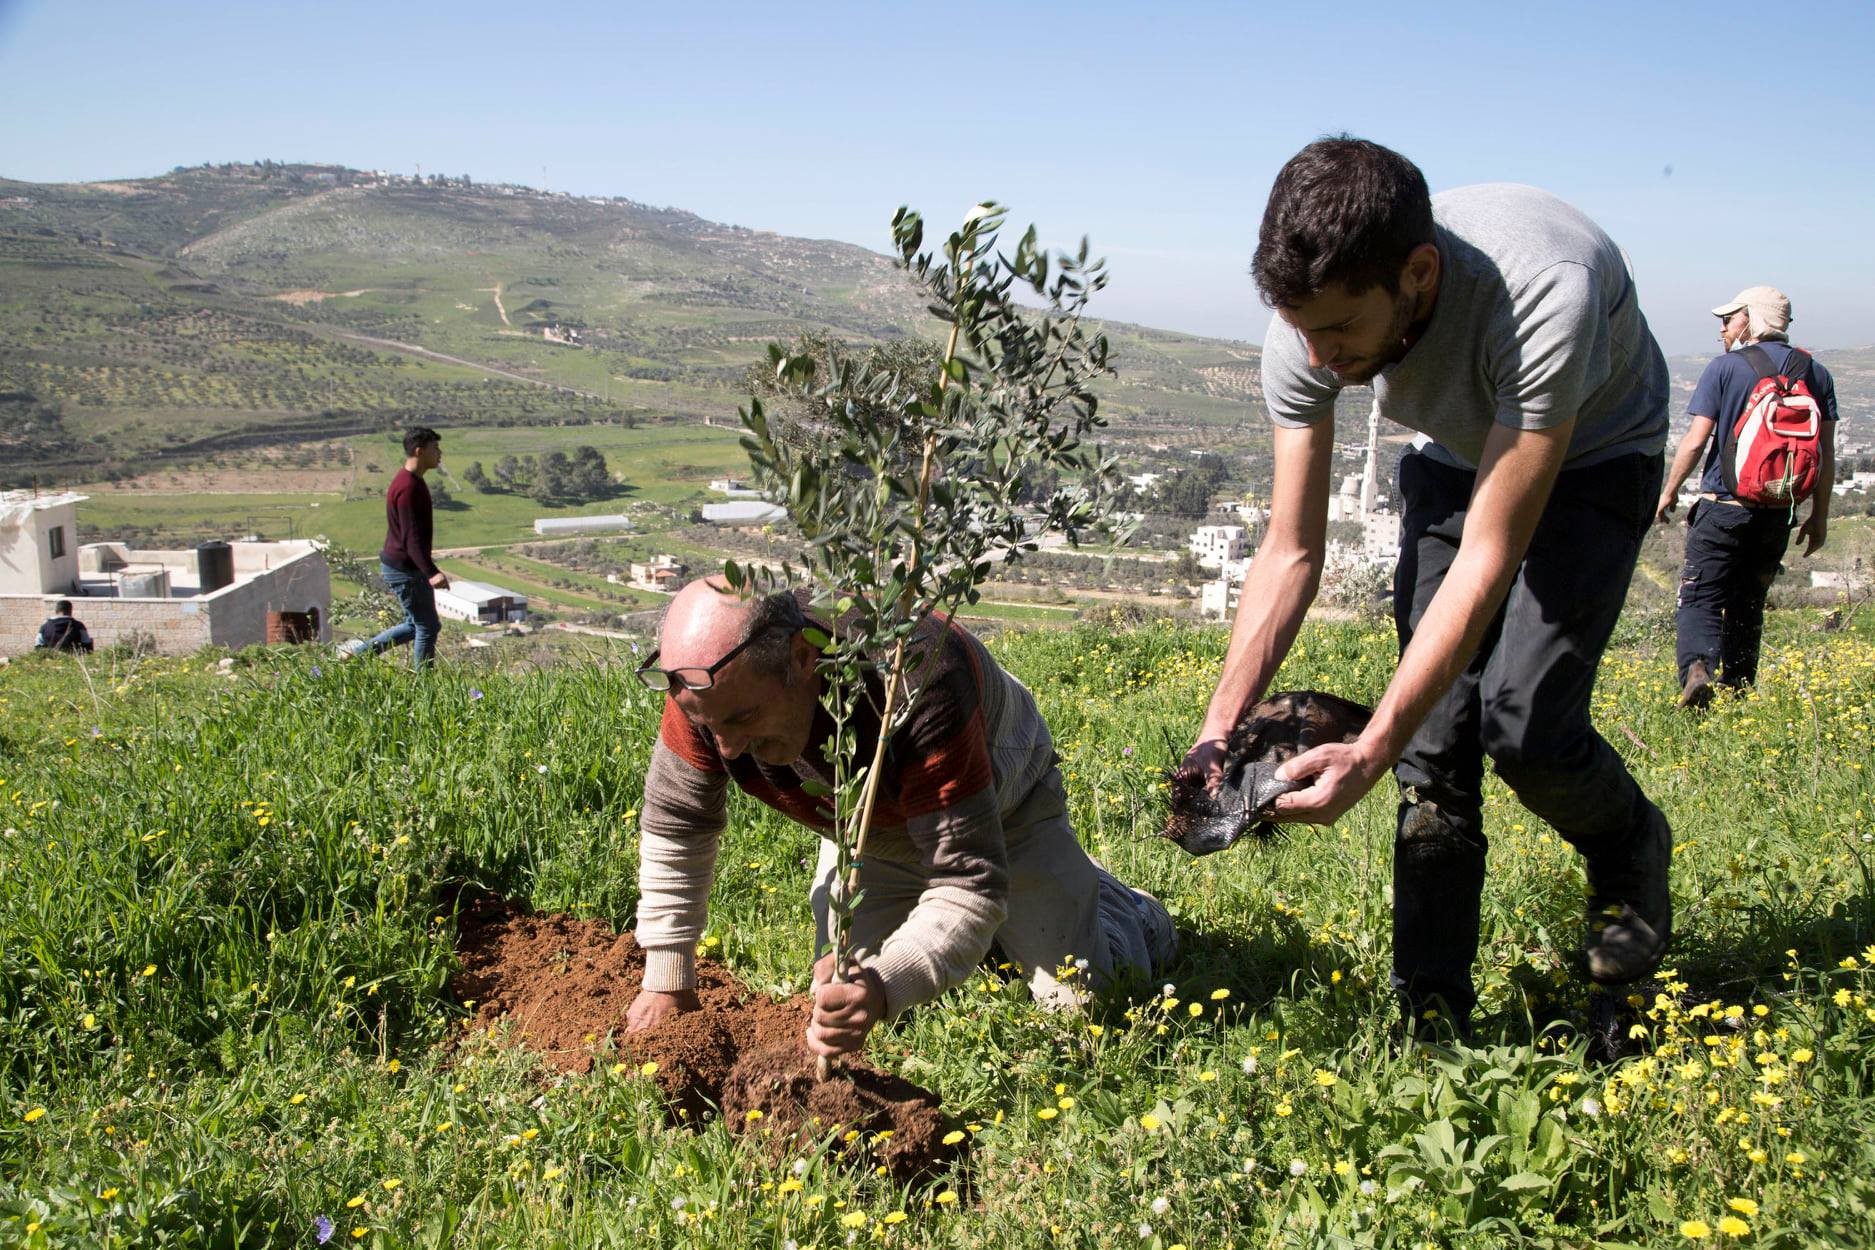 Volunteers organized by Rabbis for Human Rights work alongside Palestinian olive farmers.